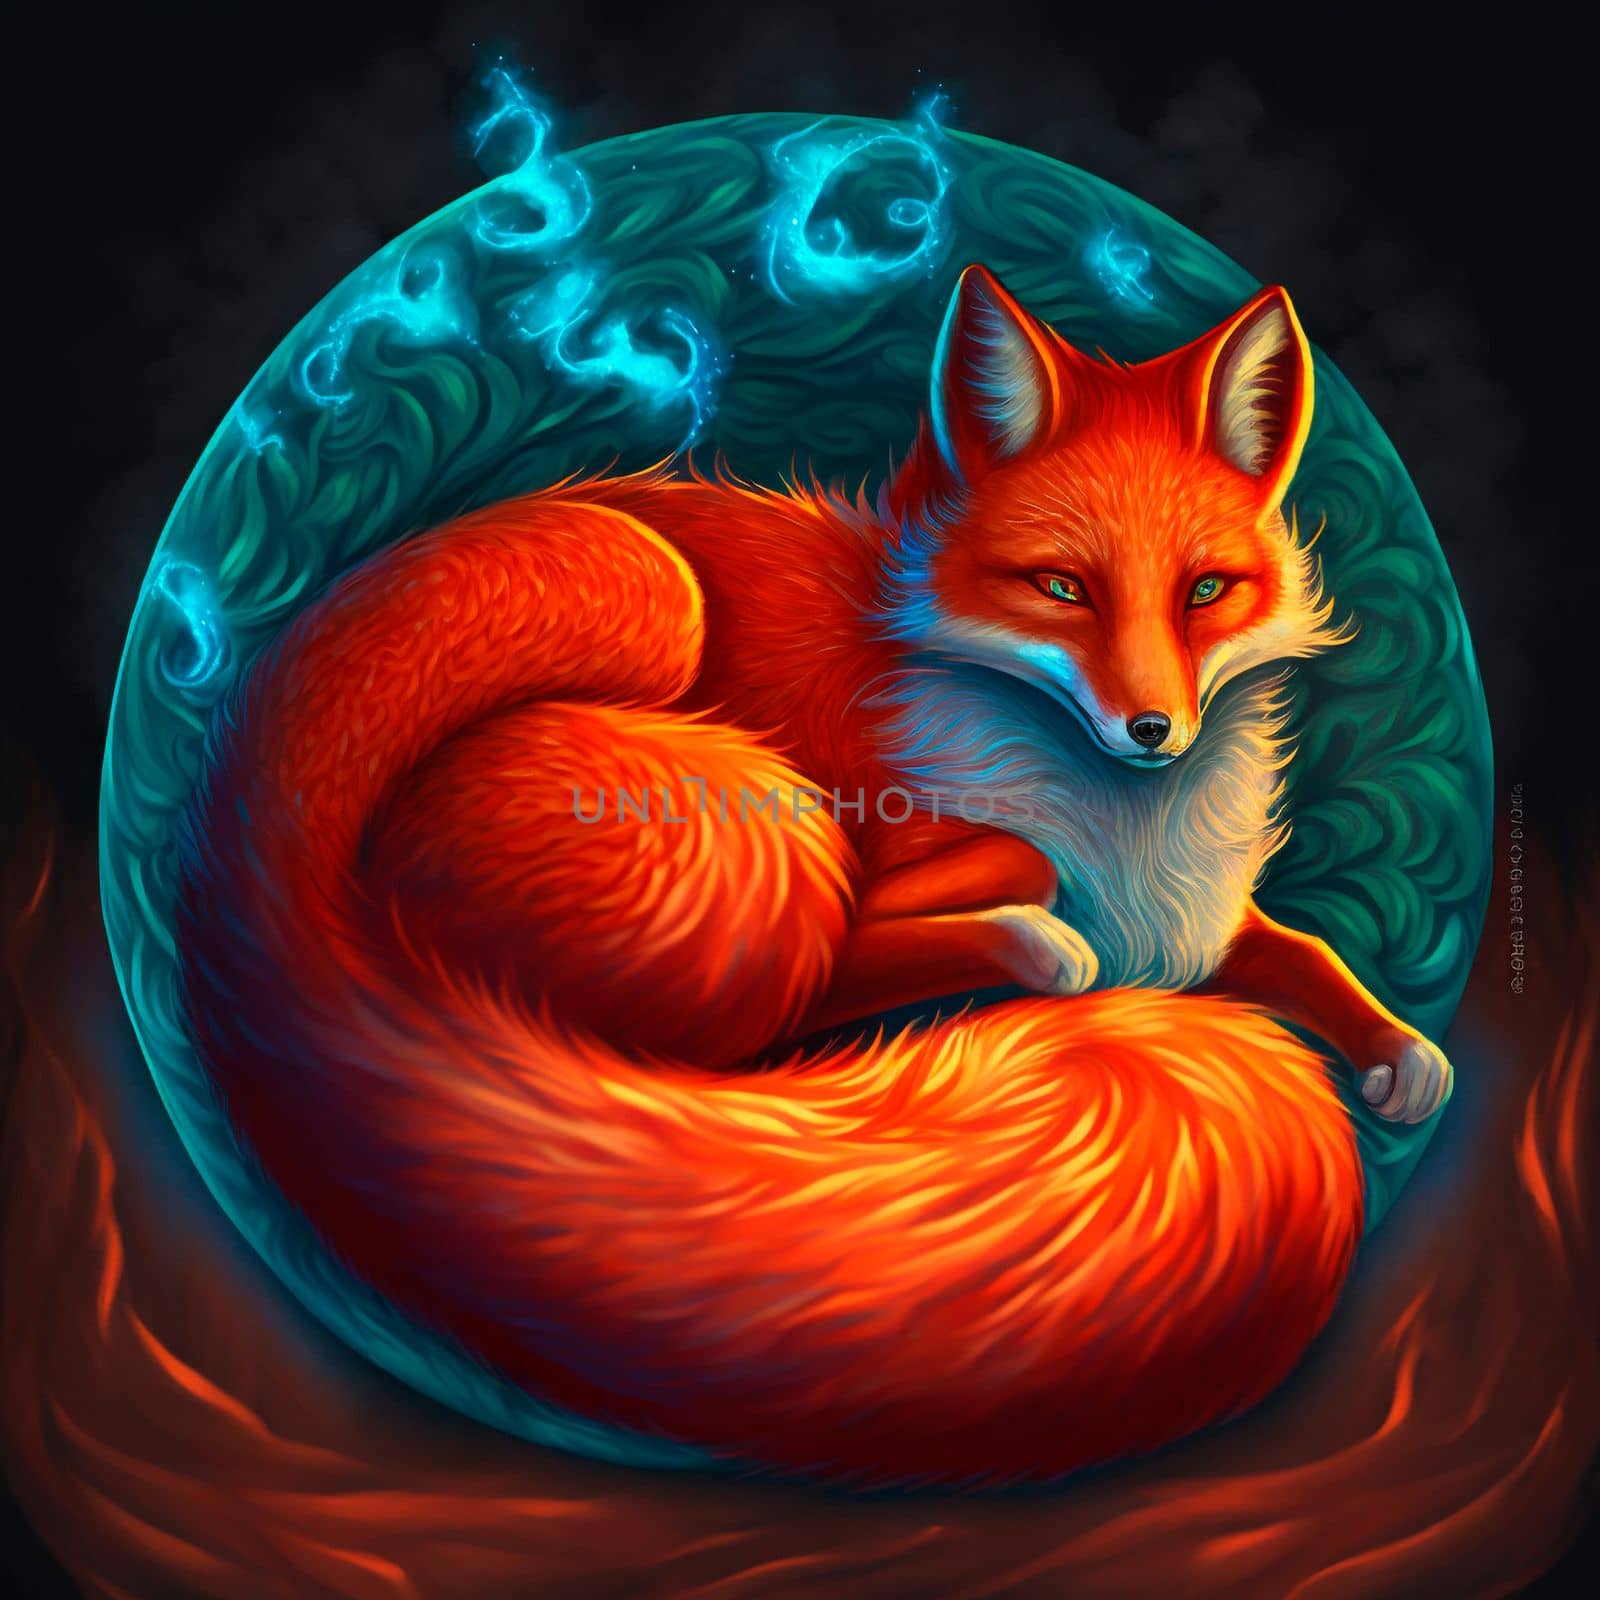 Abstract illustration of a fiery fox. High quality illustration